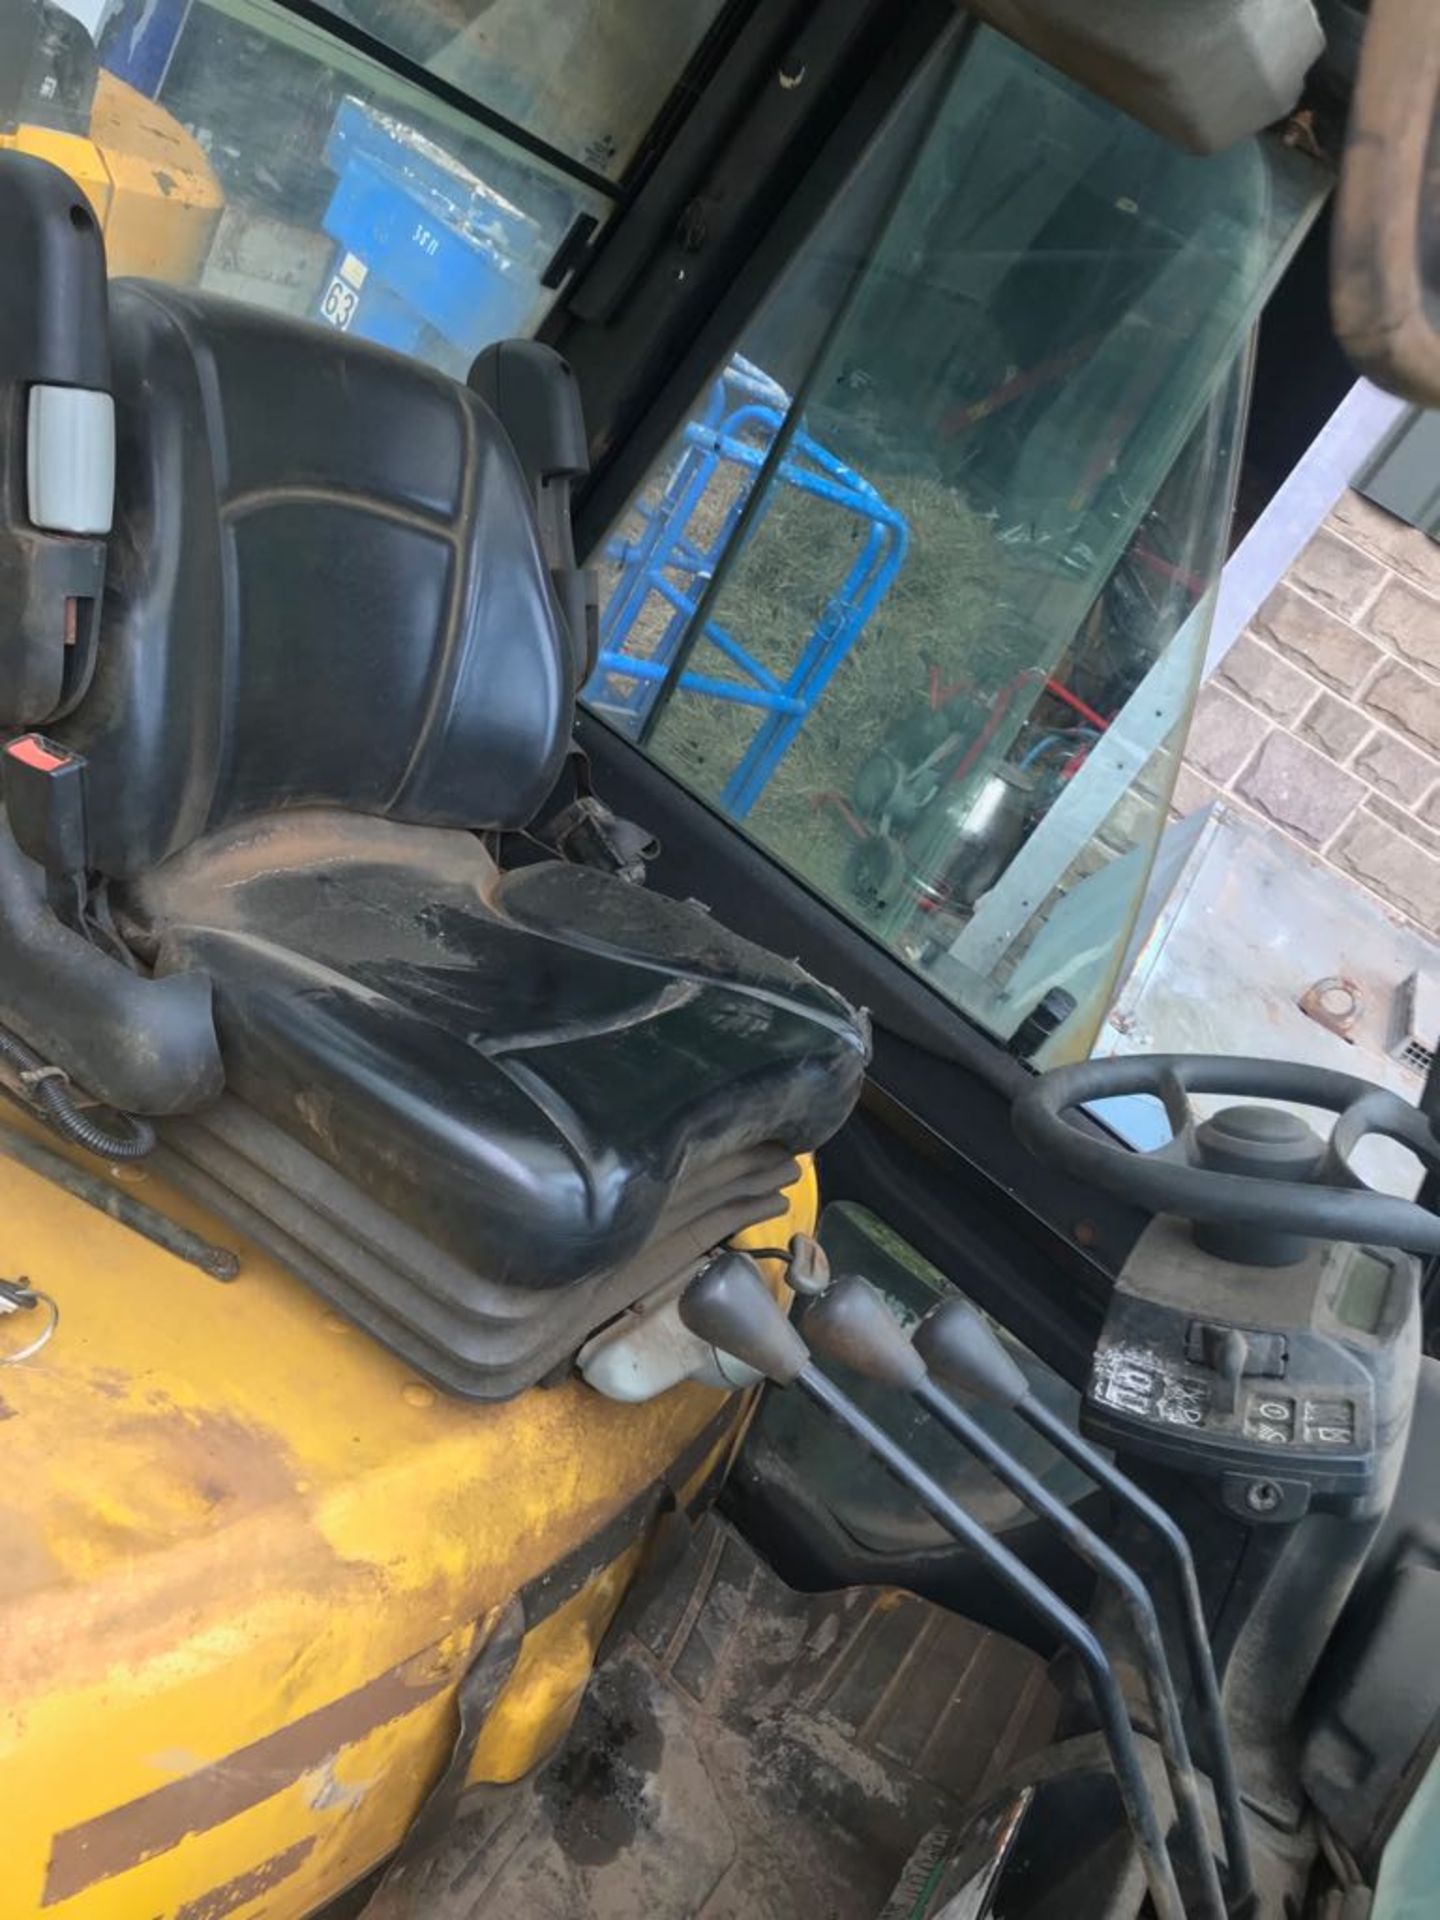 2012 YALE VERACITOR 40 VX FORKLIFT, STARTS BUT BRAKES ARE STUCK ON *PLUS VAT* - Image 5 of 6